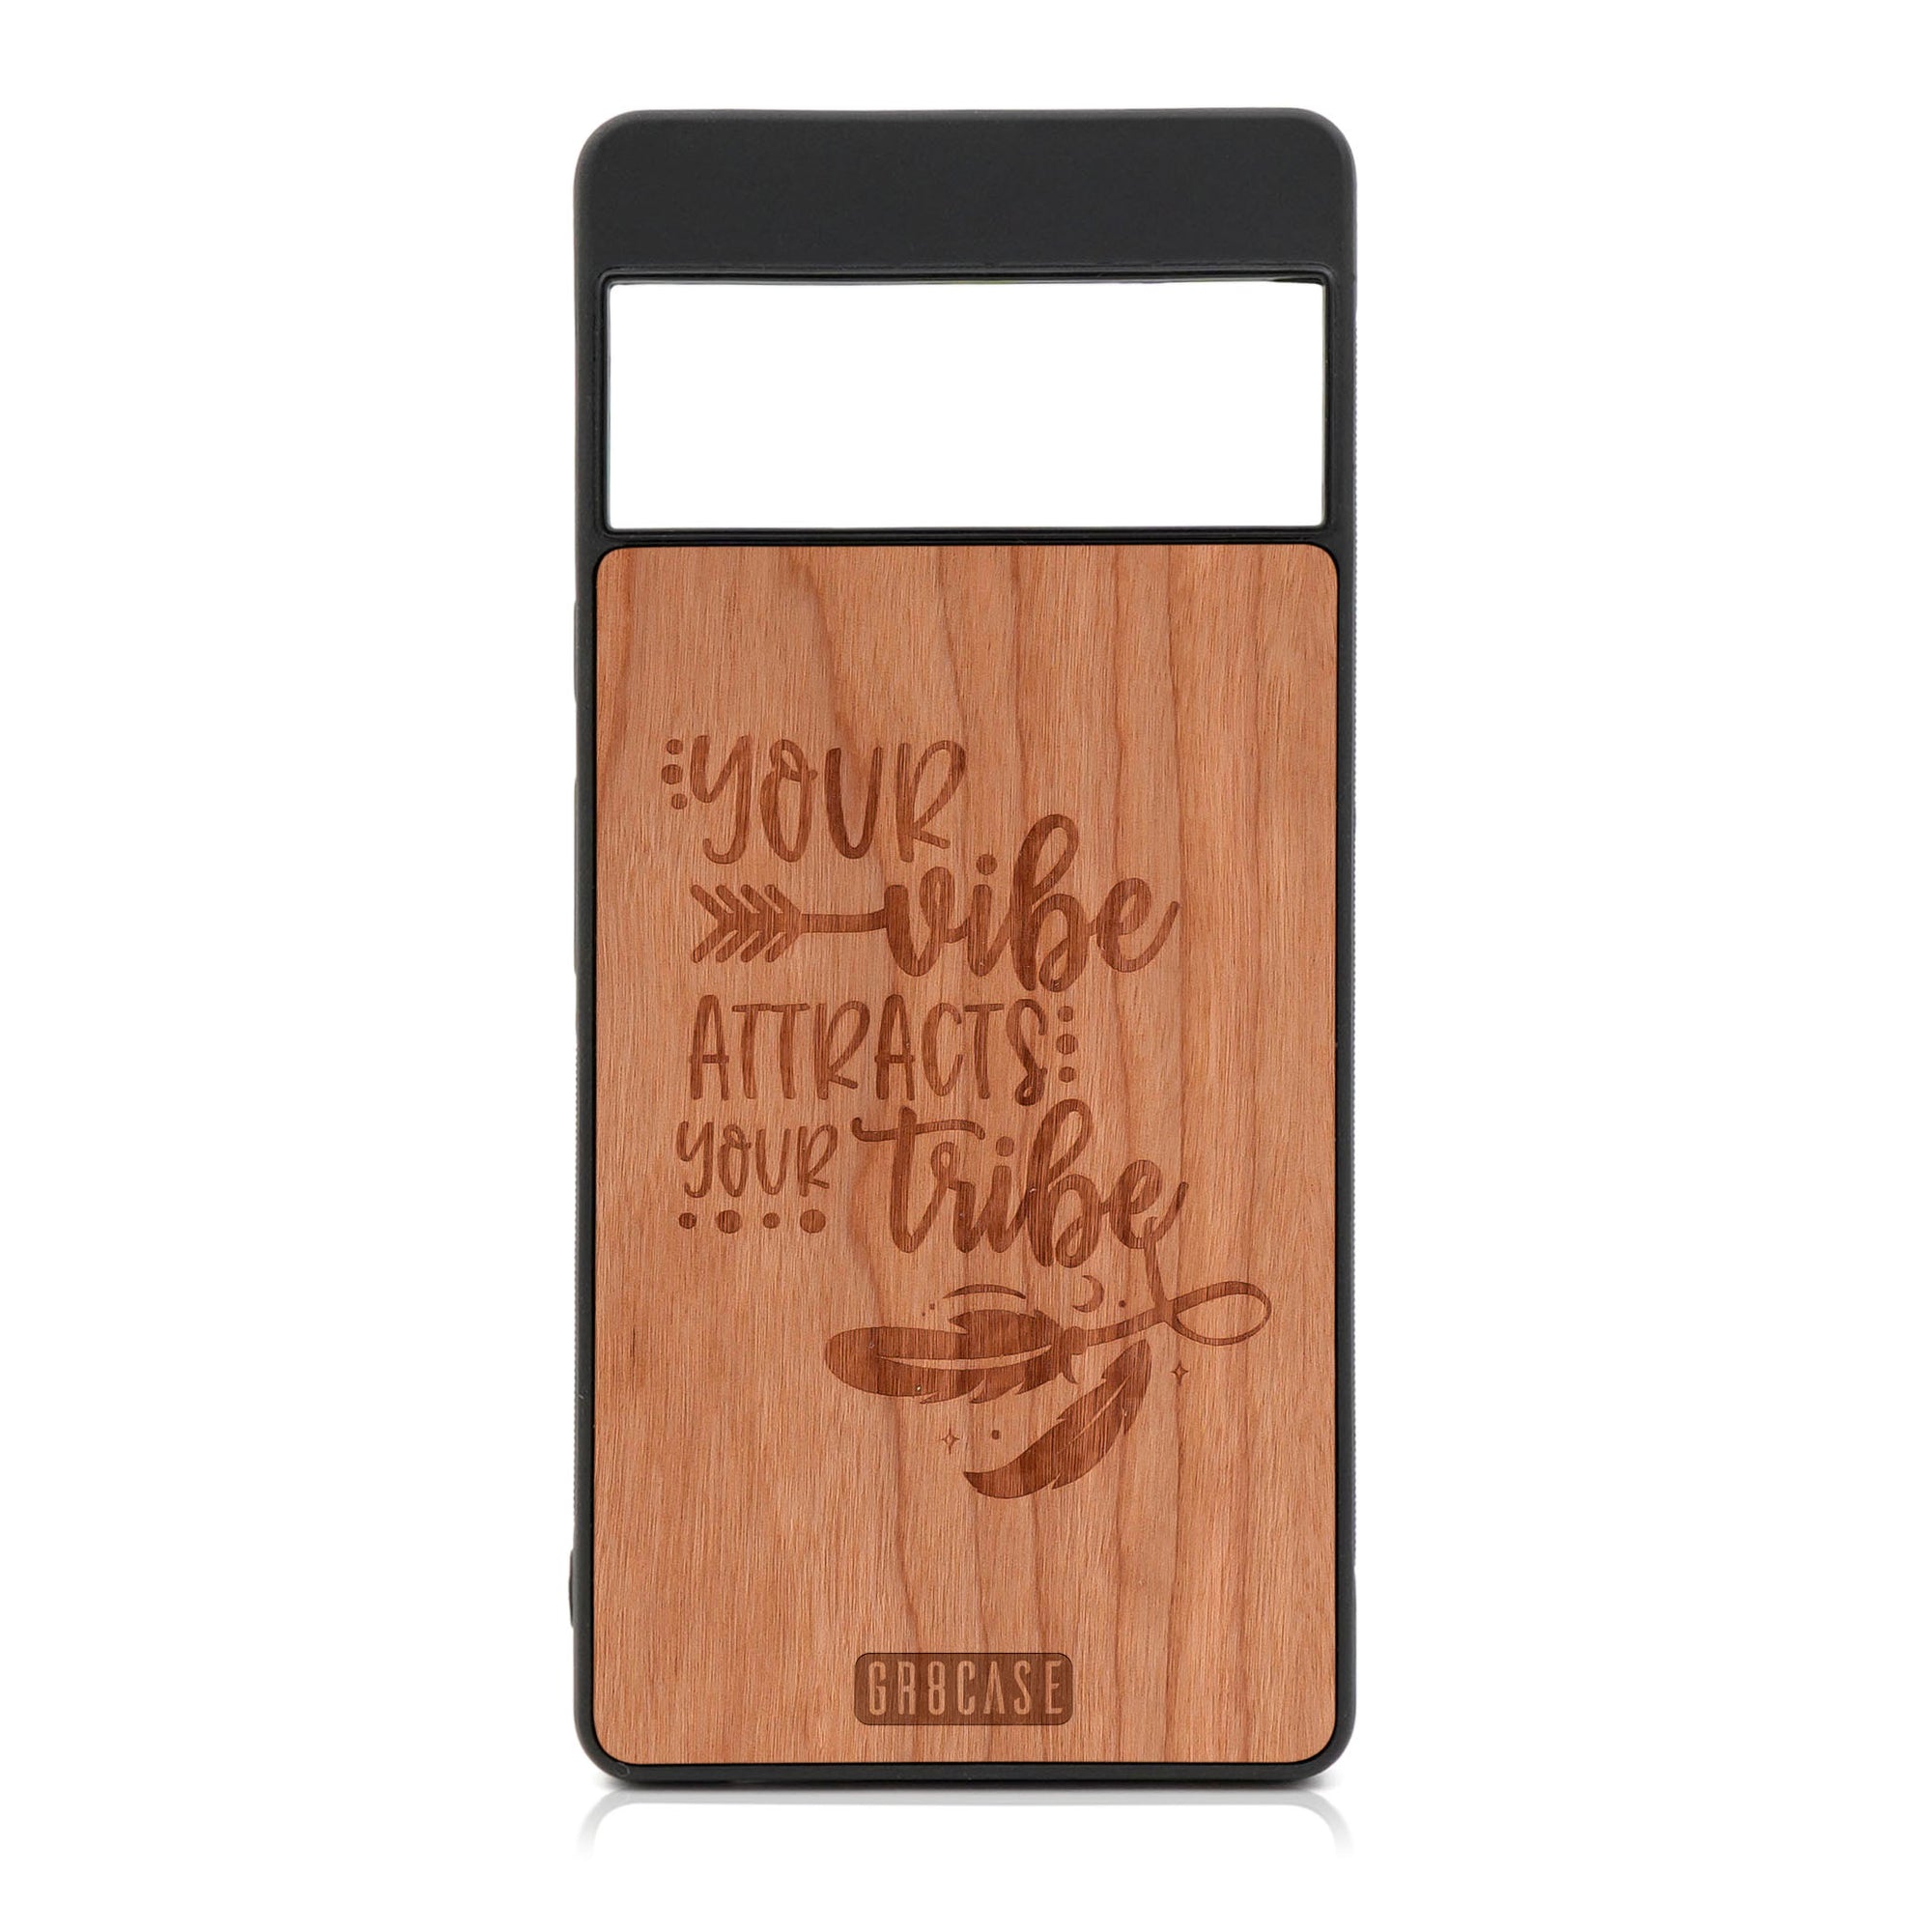 Your Vibe Attracts Your Tribe Design Wood Case For Google Pixel 6